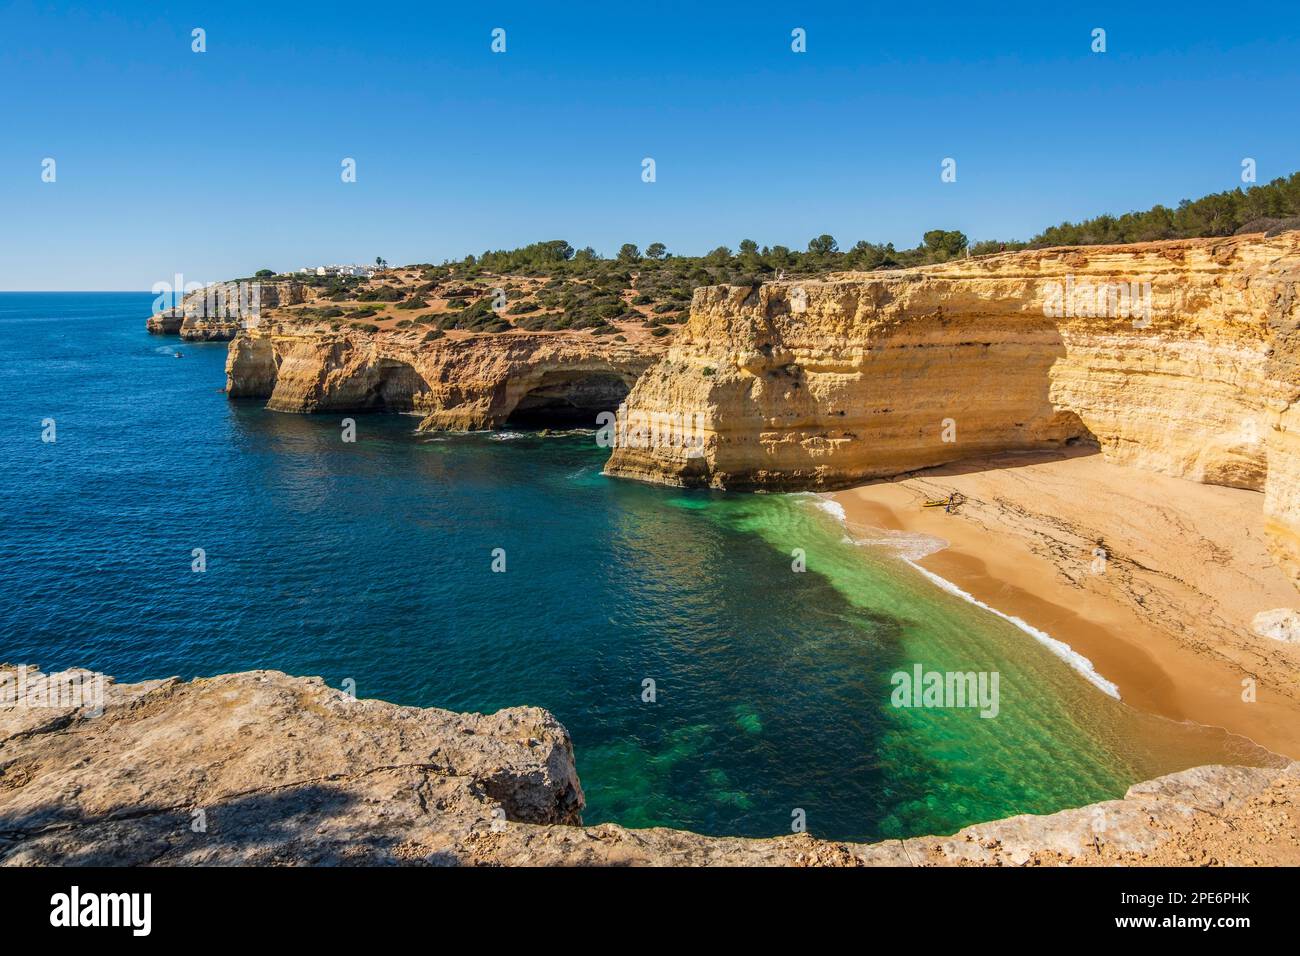 Cliffs and rock formation at Corredoura beach, Algarve, Portugal Stock Photo